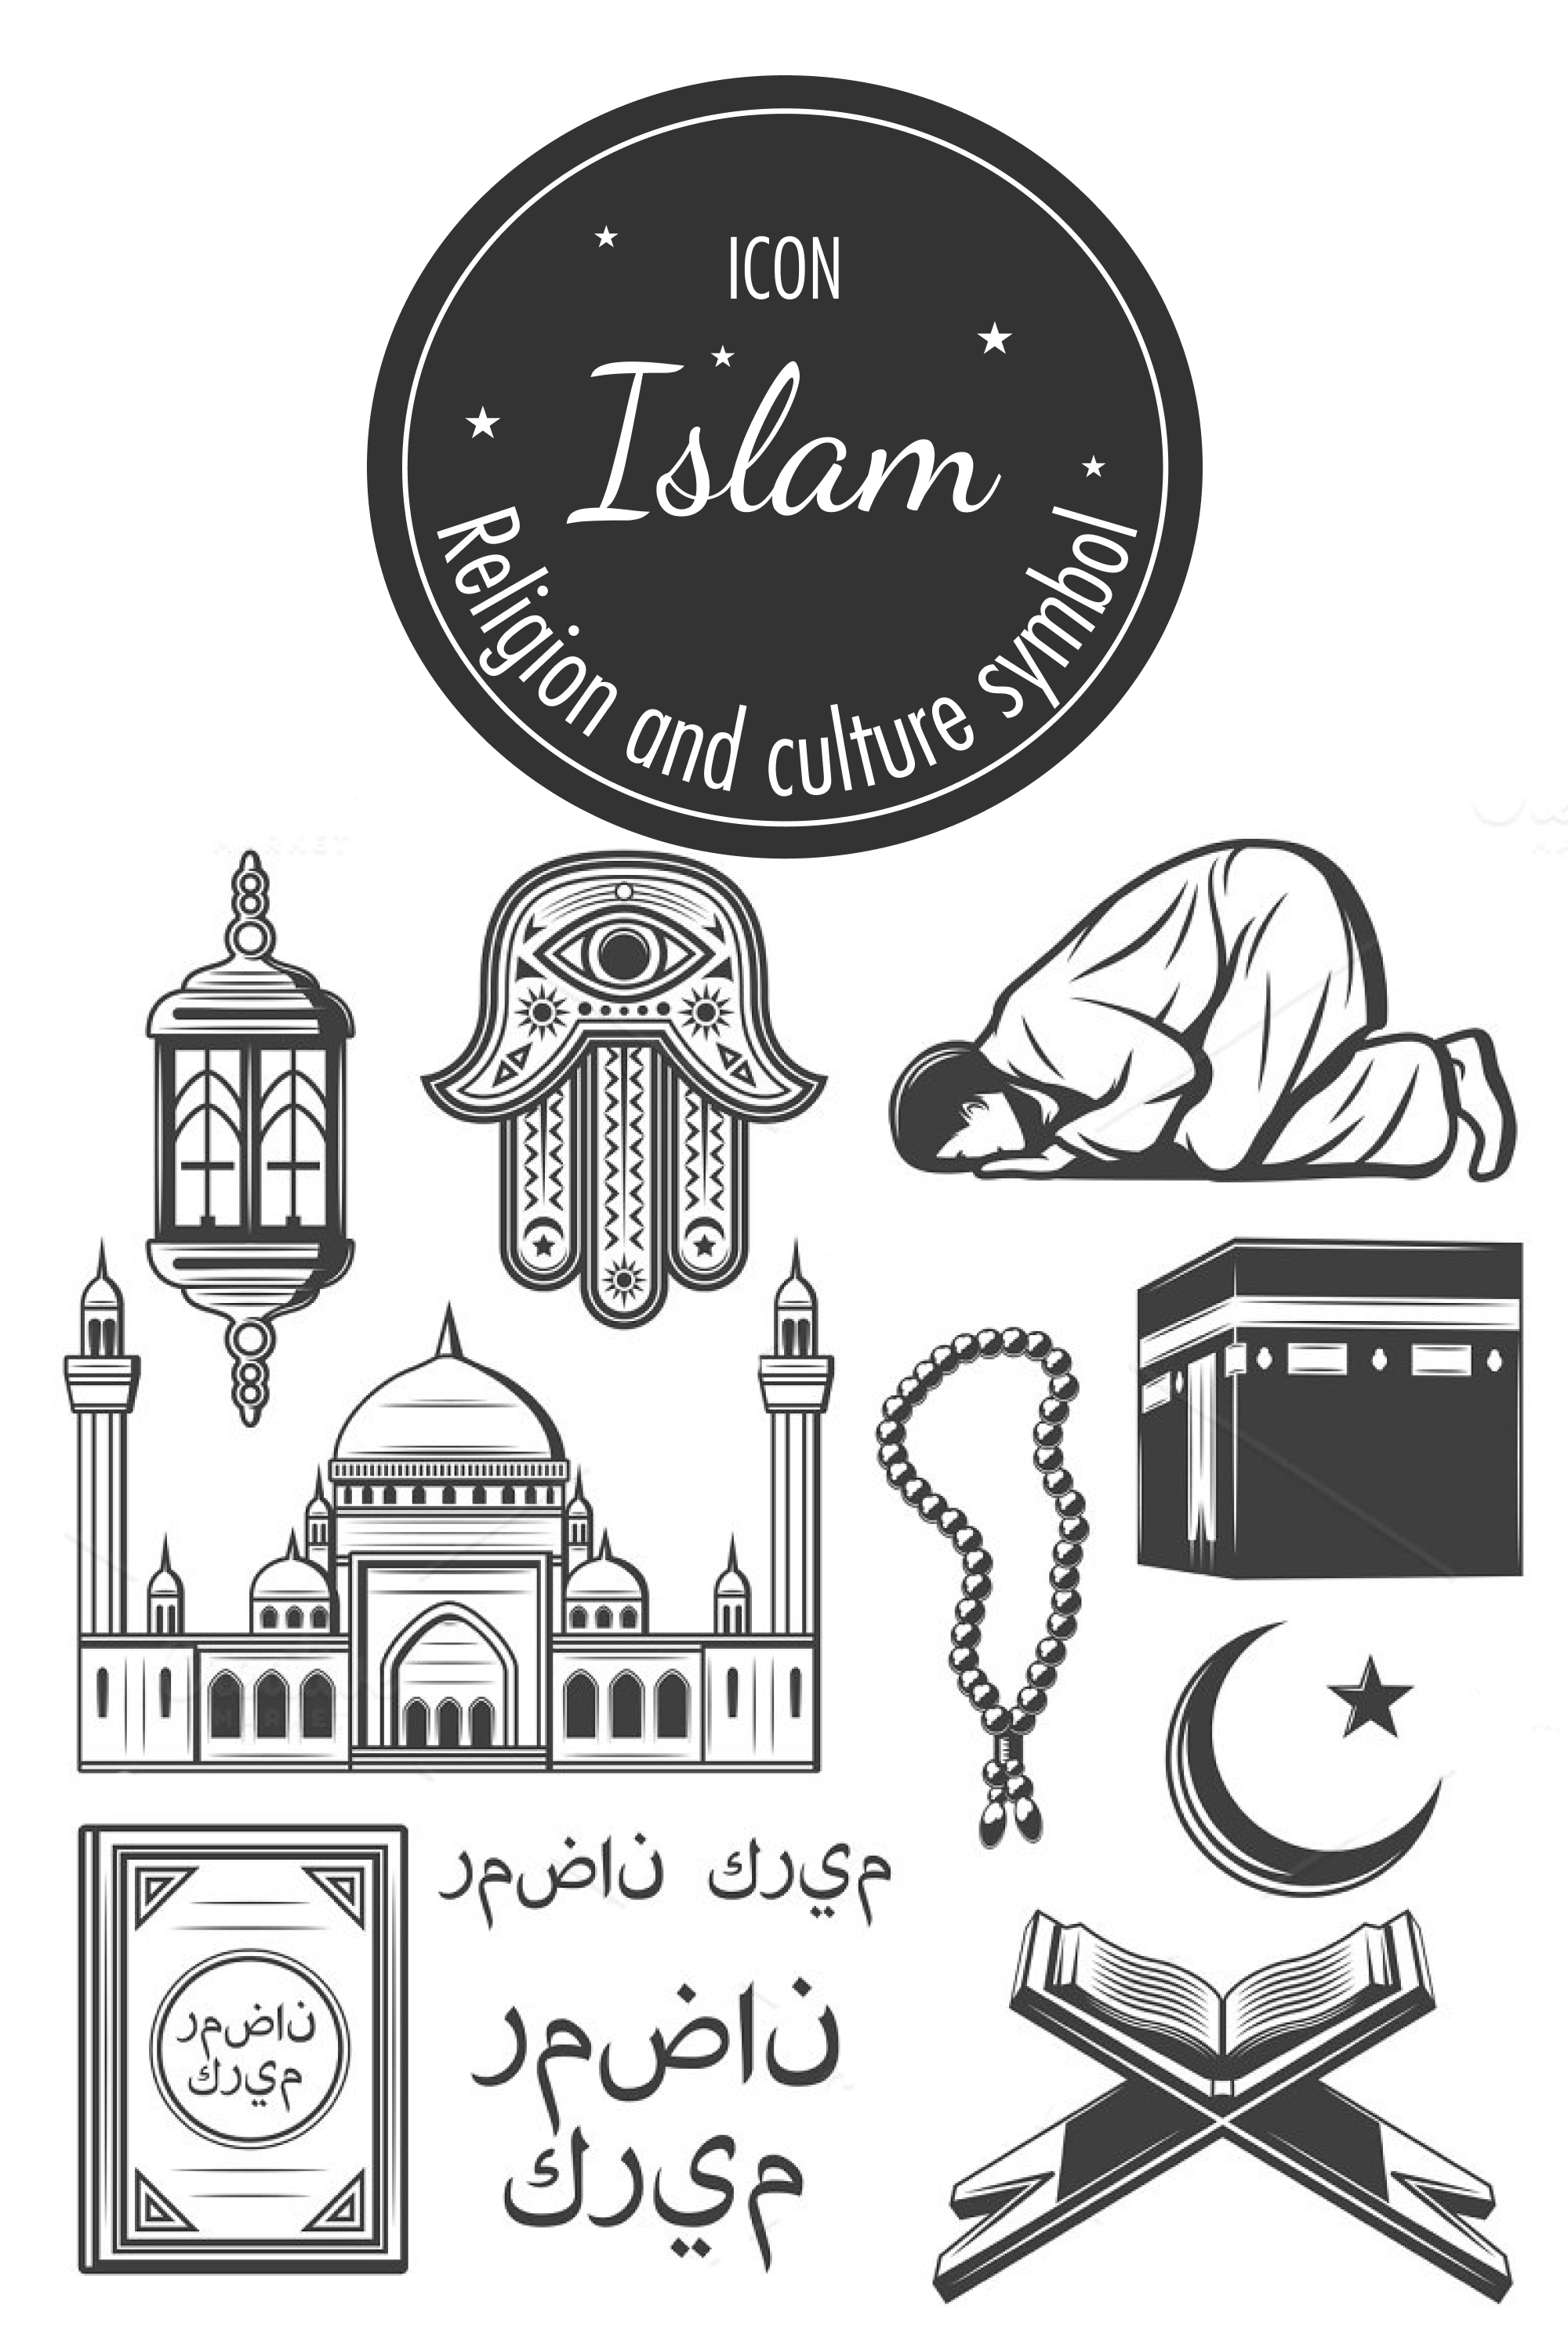 Islam icon with religion and culture symbol of pinterest.